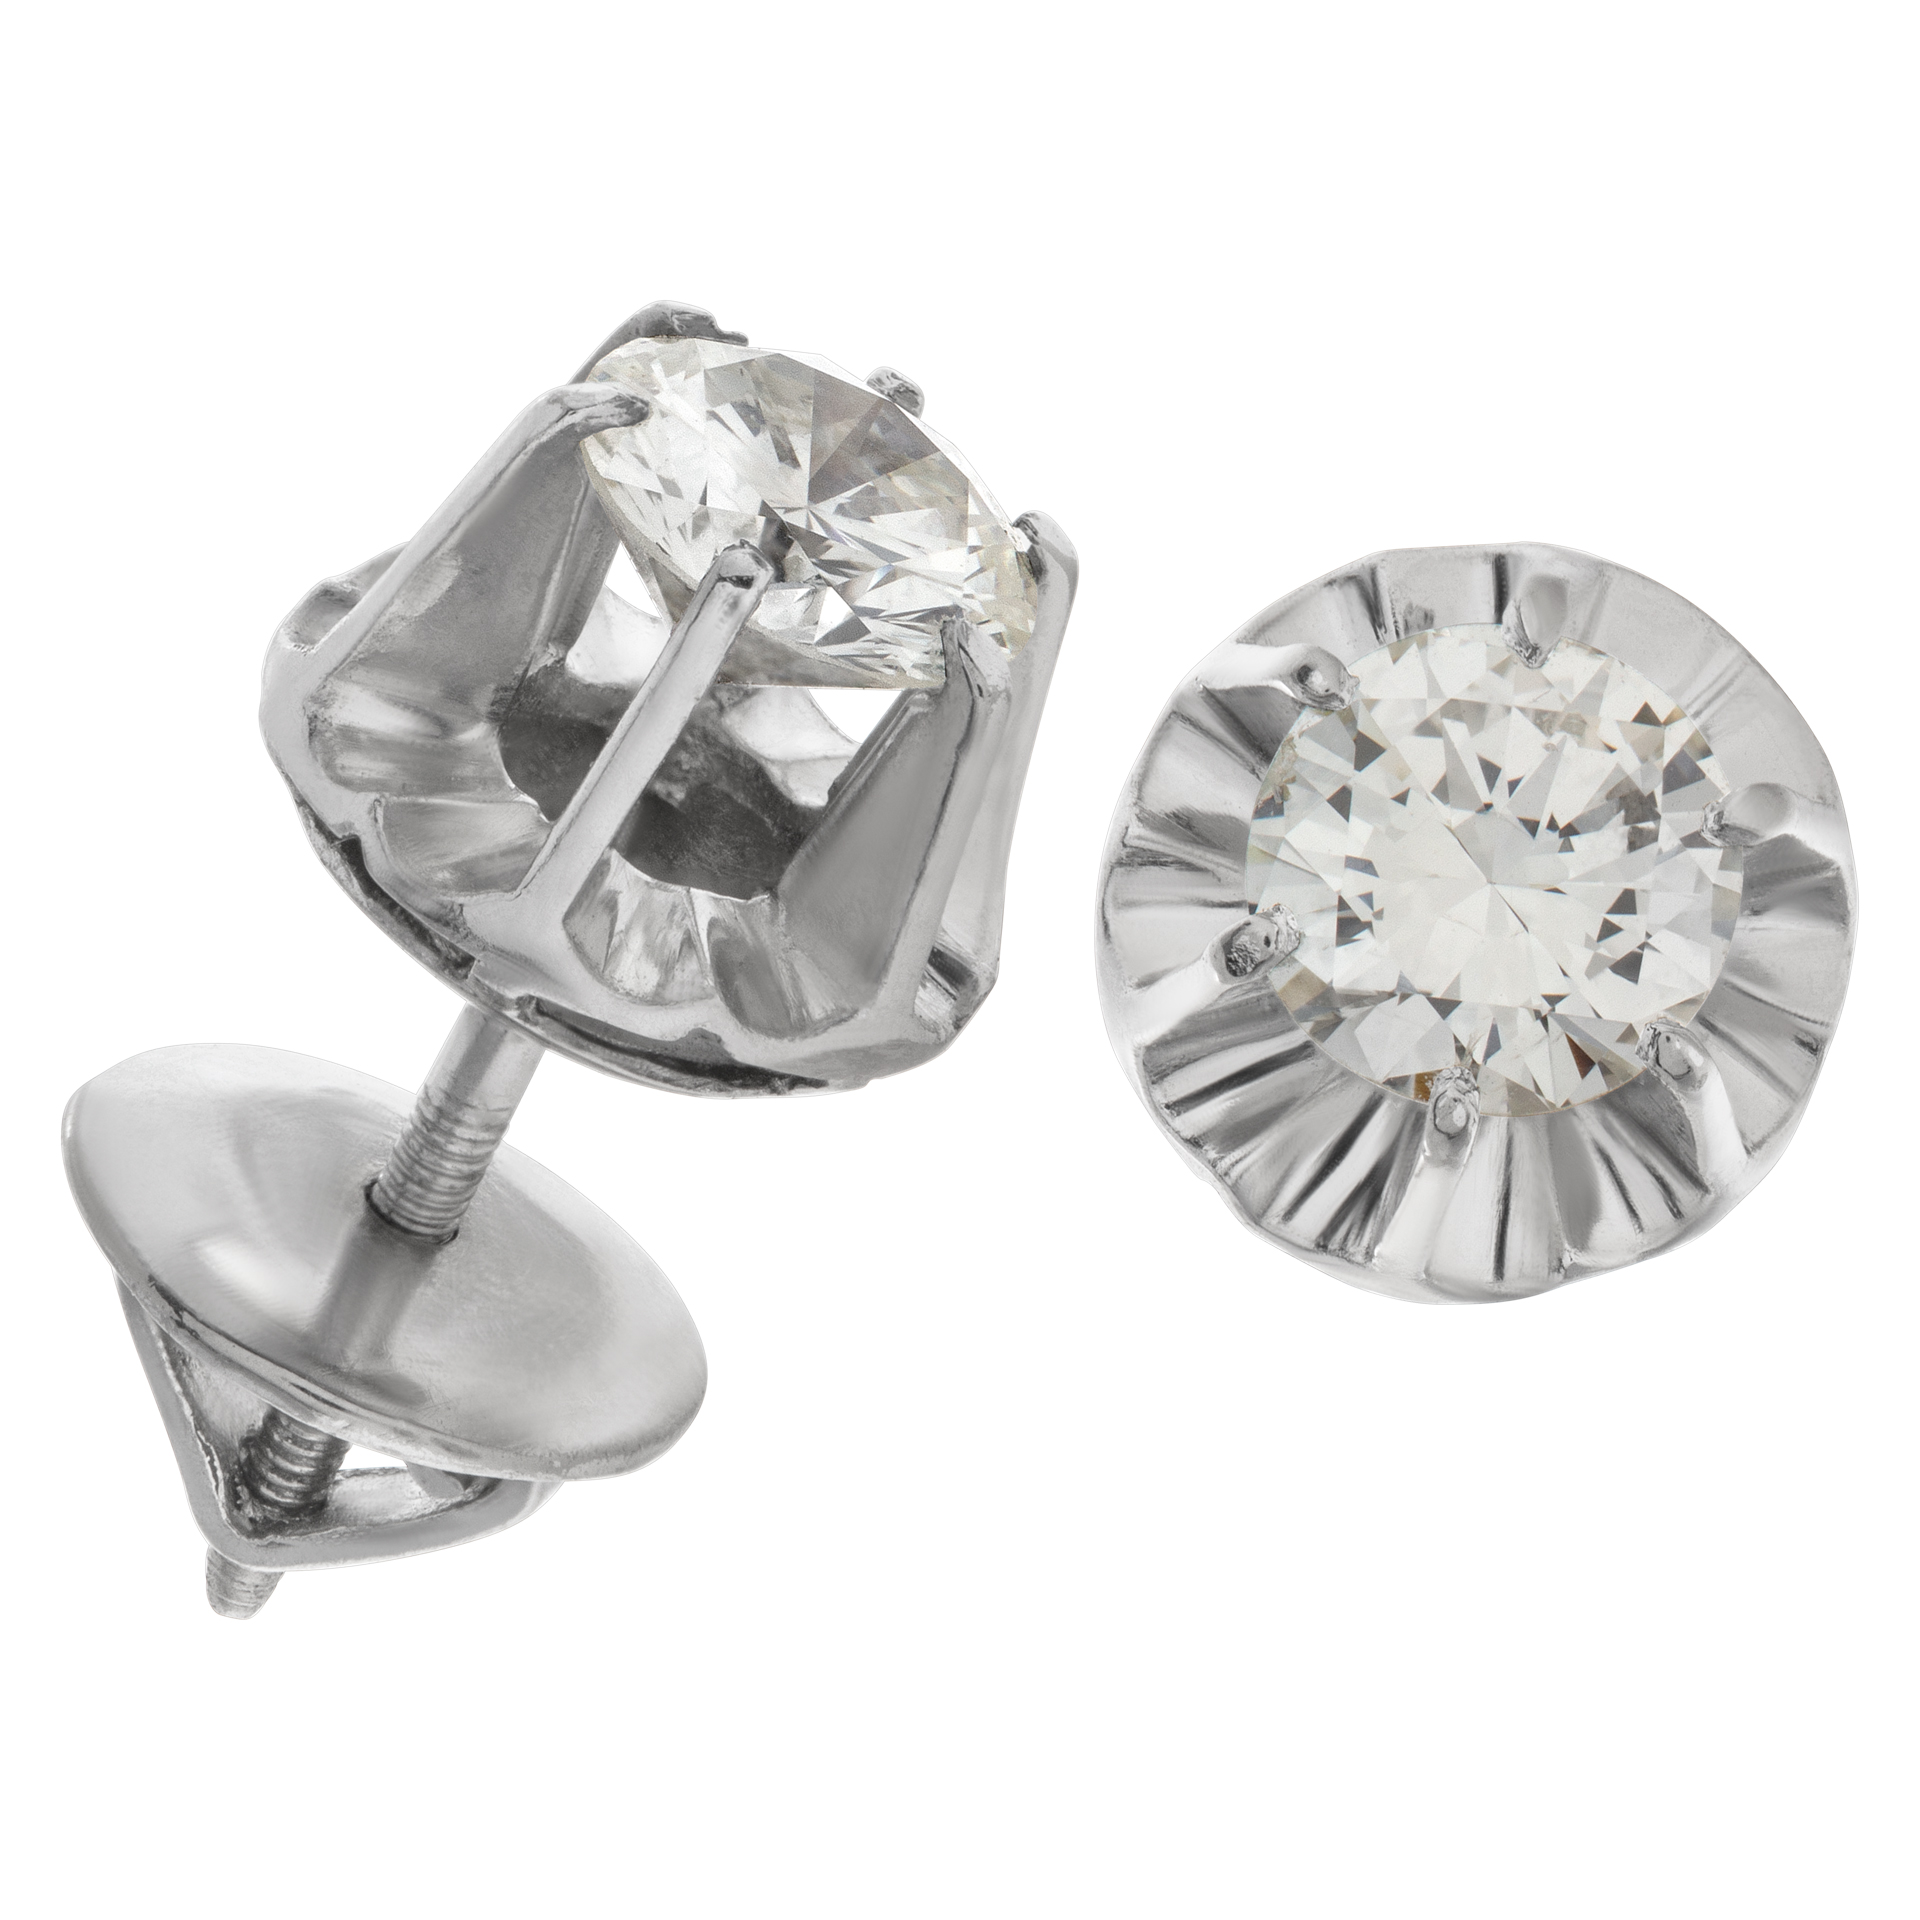 Shiny and sweet Diamond studs. 0.90 carats (J color, SI1 clarity) set in platinum image 3